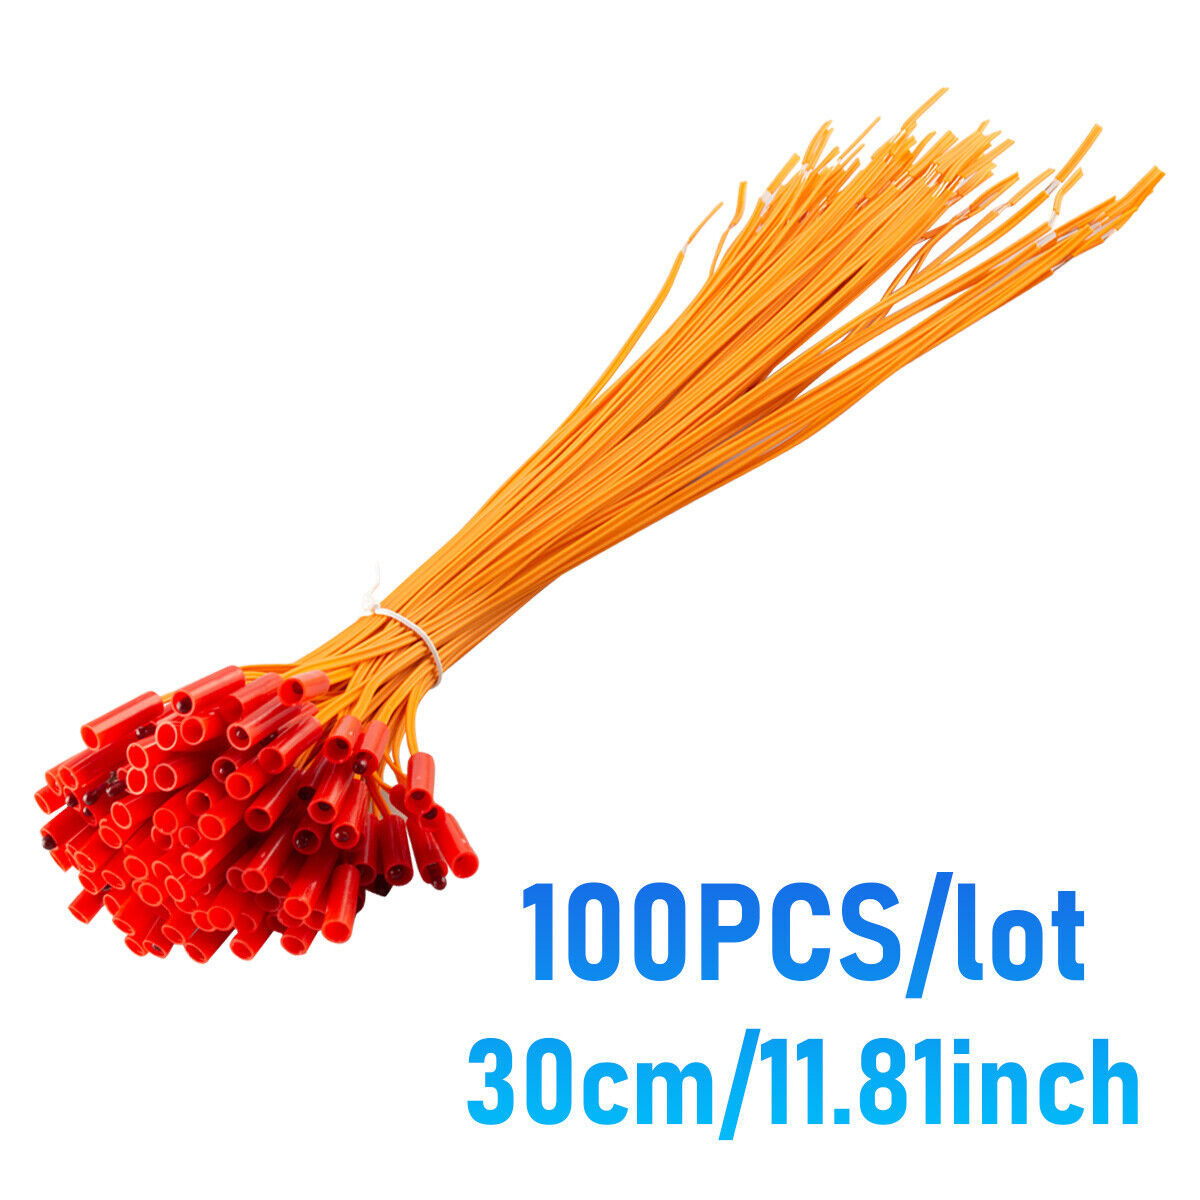 100pcs/lot 11.81in copper Remote Firework Firing system connect wire orange line